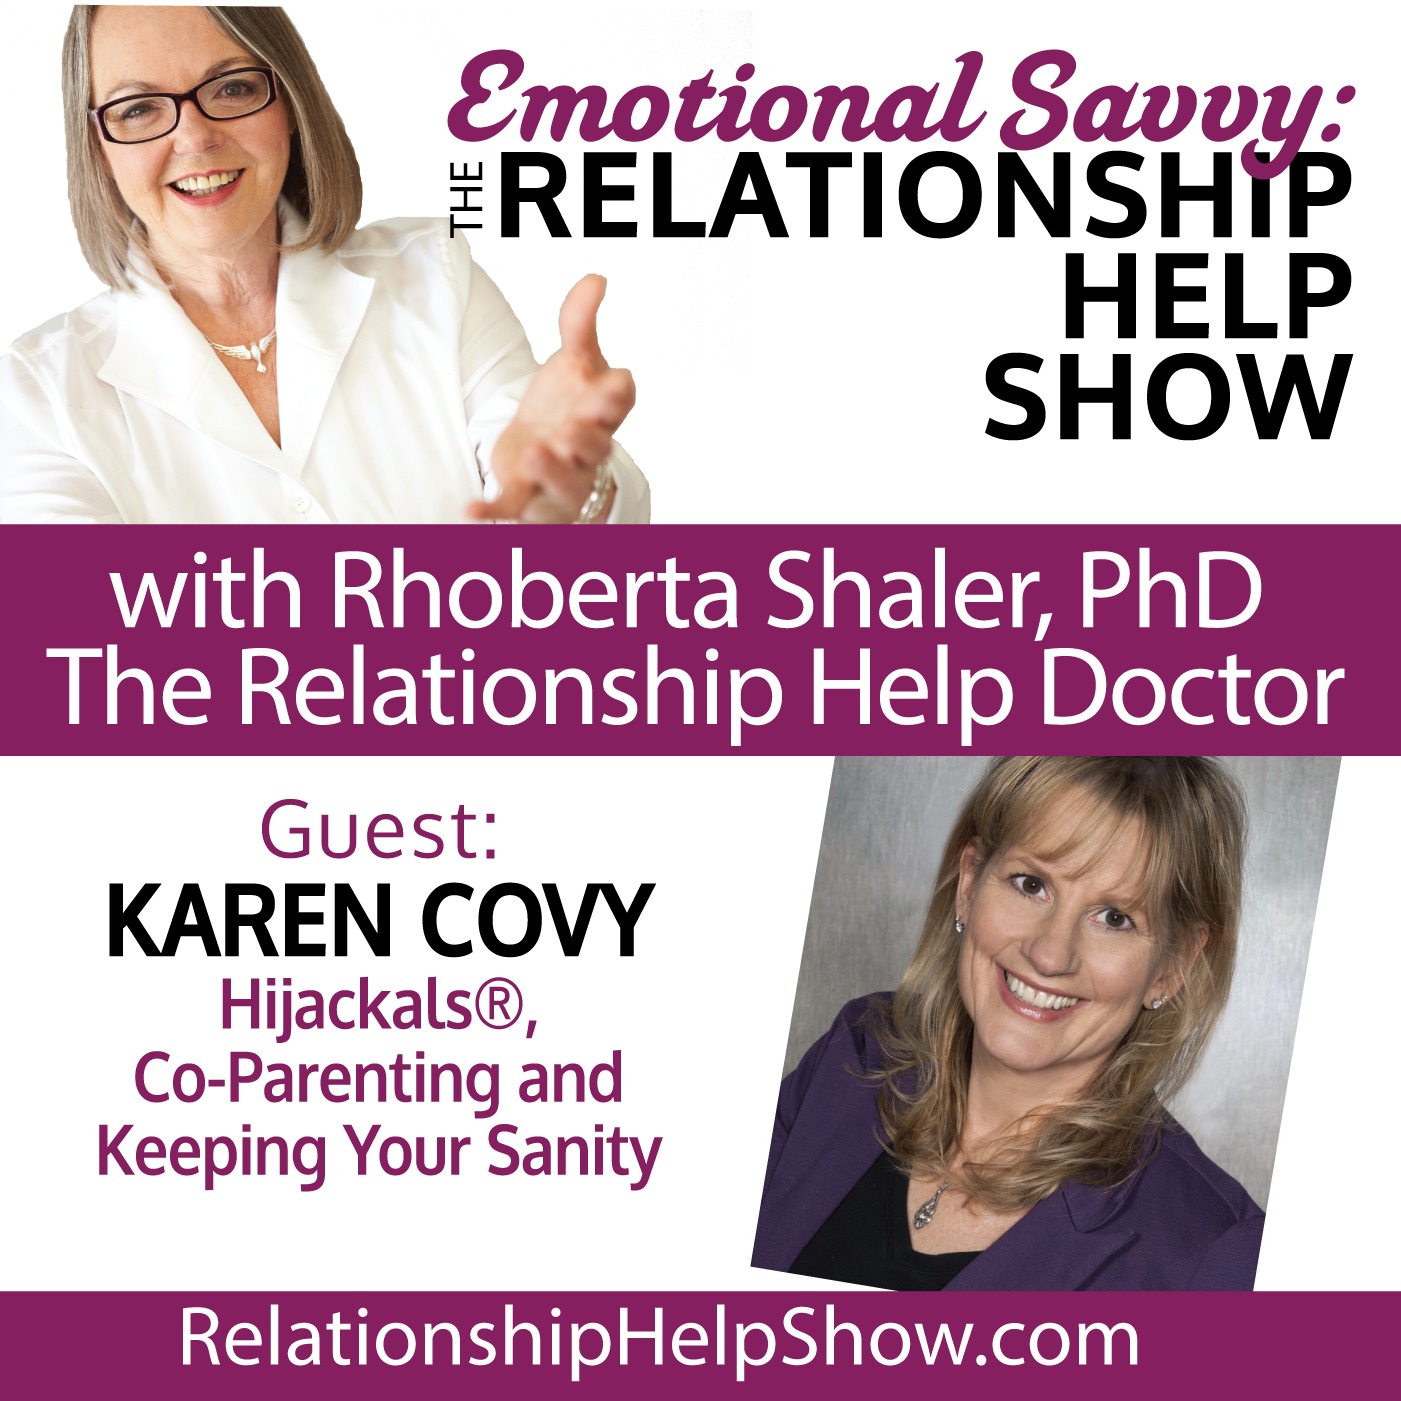 Co-Parenting and Keeping Your Sanity. Guest: Karen Covy